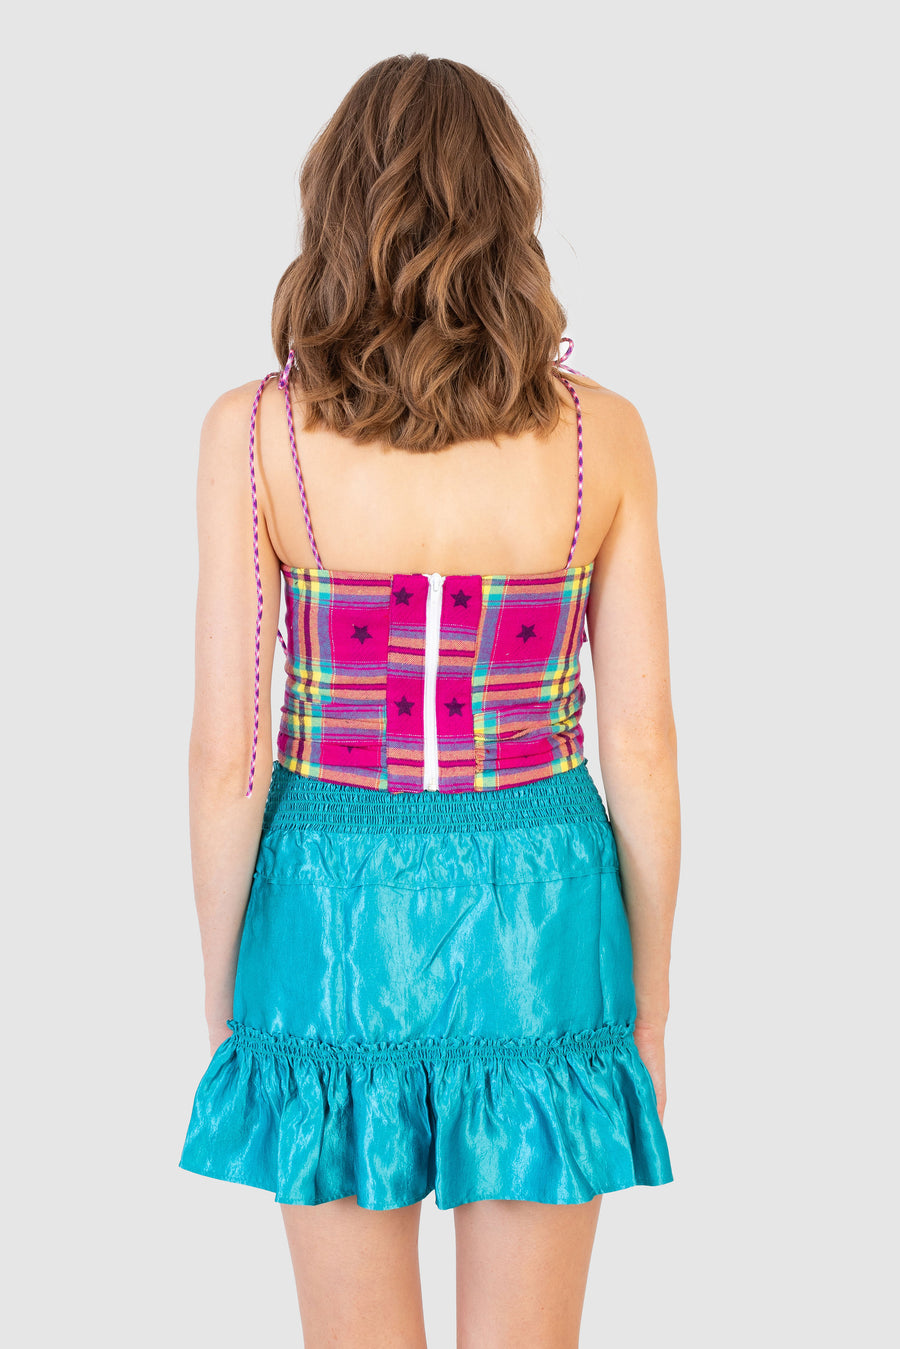 Genna Skirt Turquoise Pearl